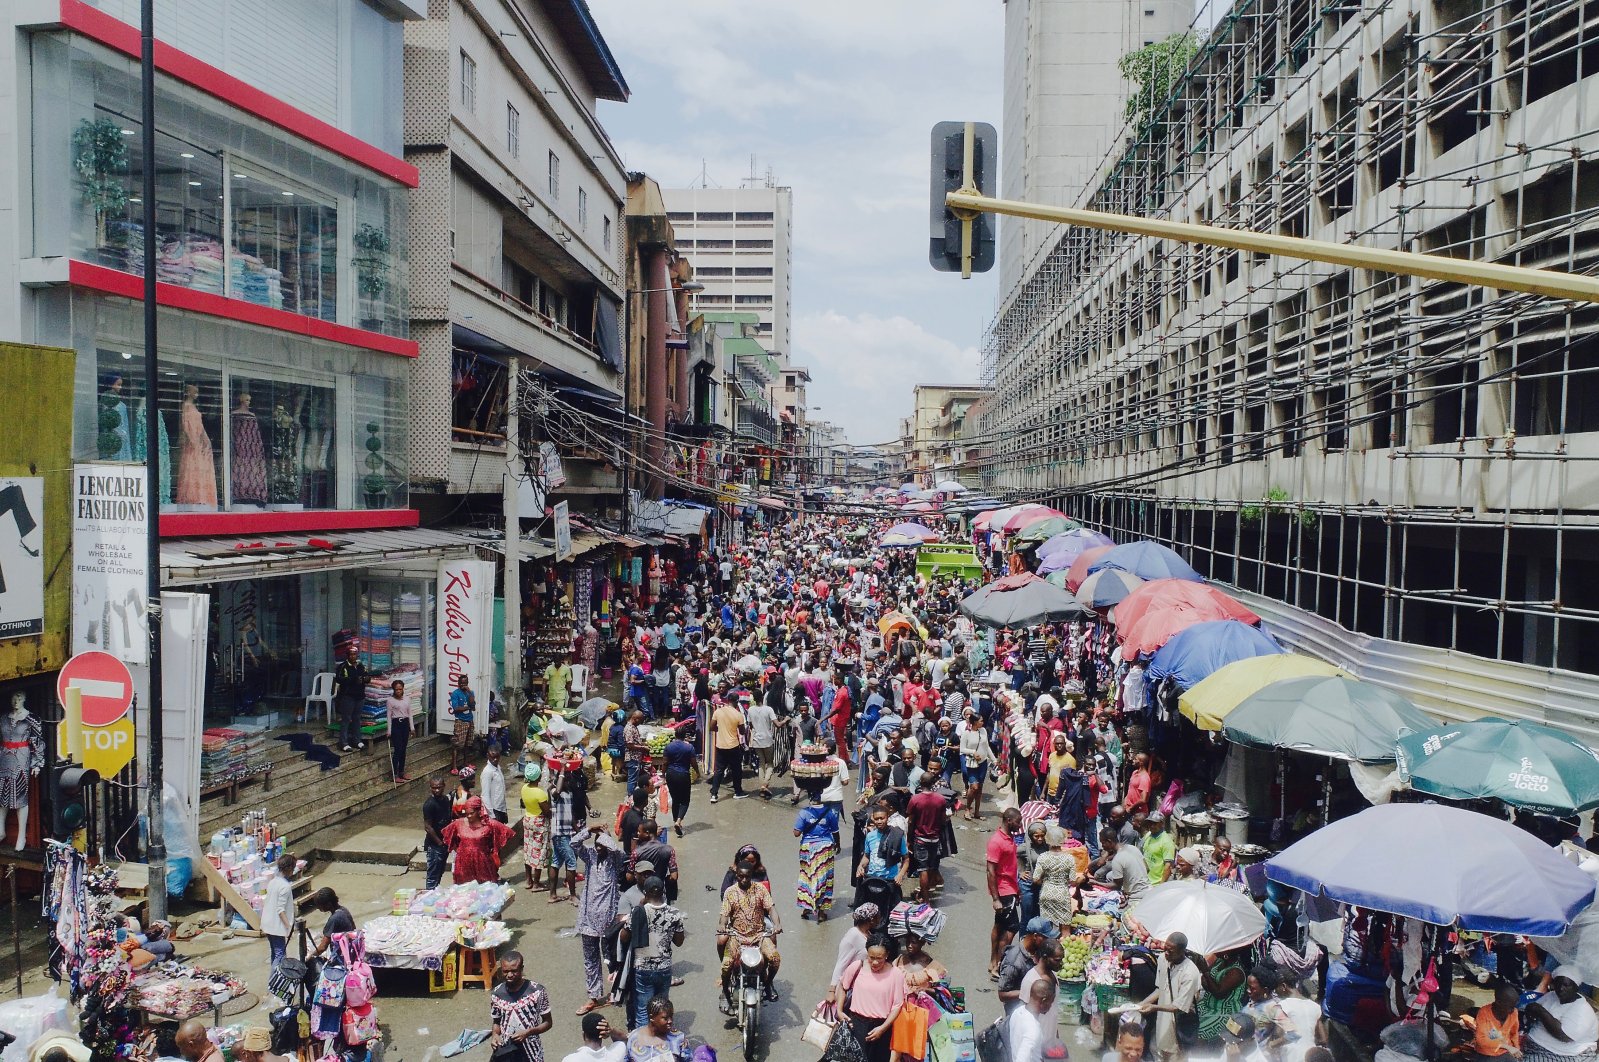 A crowded market street in Lagos, Nigeria, Sept. 24, 2018. (ShutterStock Photo)